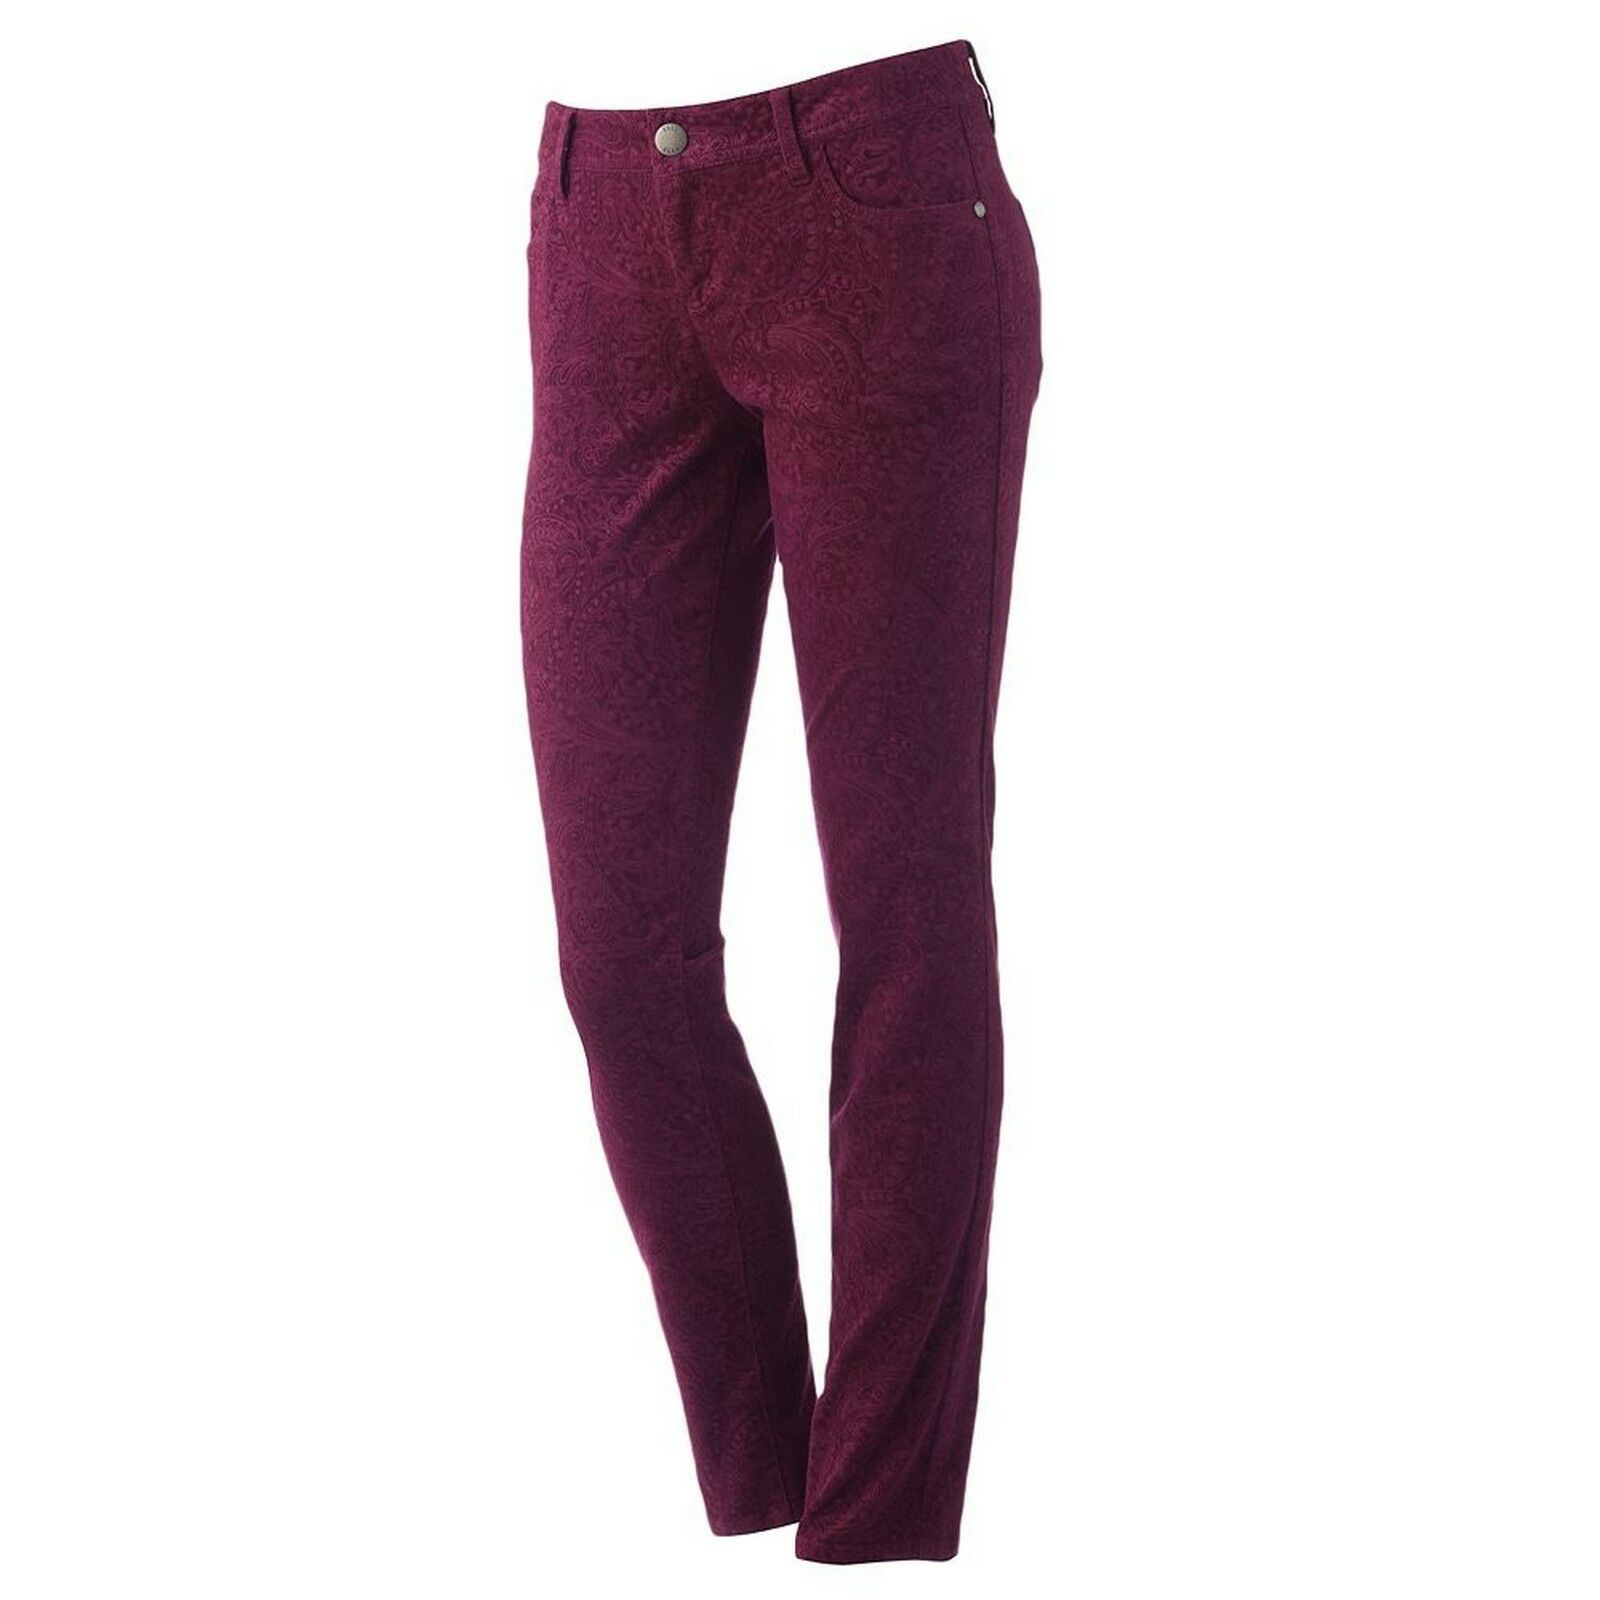 Primary image for Elle Paisley Super Skinny Ankle Corduroy Pants Rich Wine